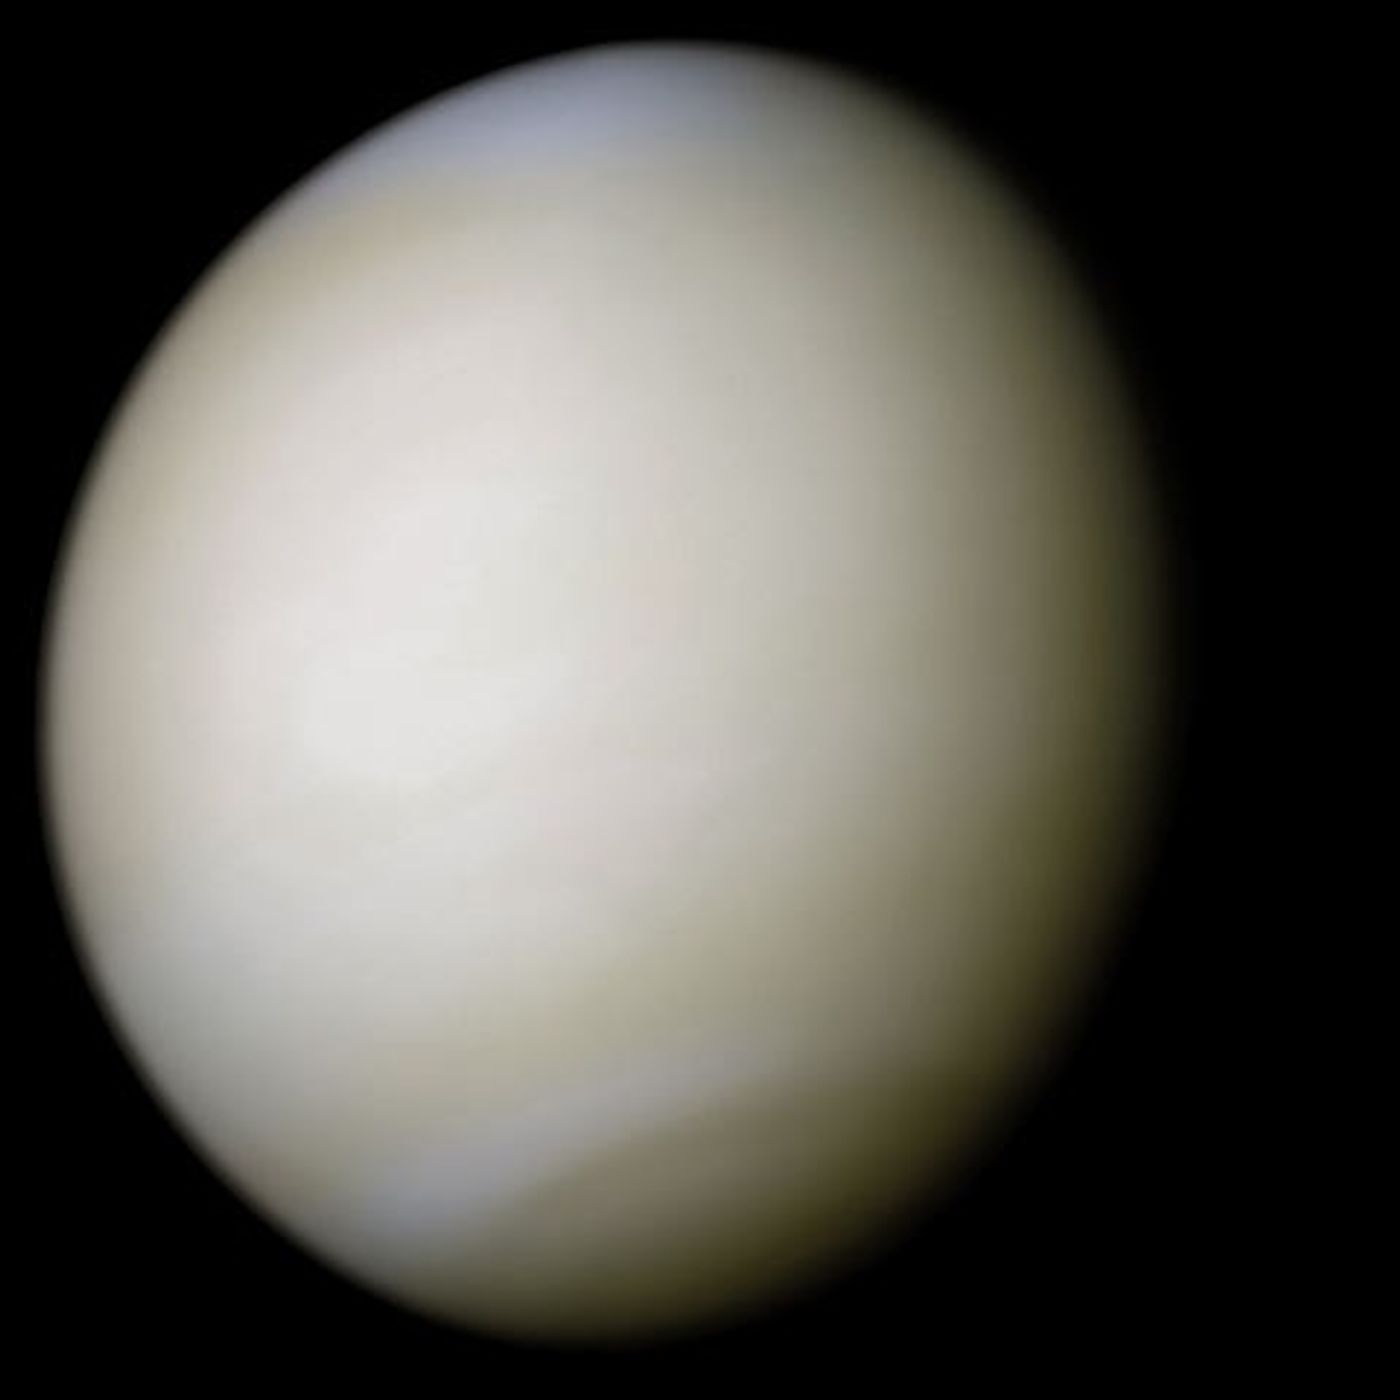 We've explored Venus' day side for some time, but the night side was holding some serious secrets.